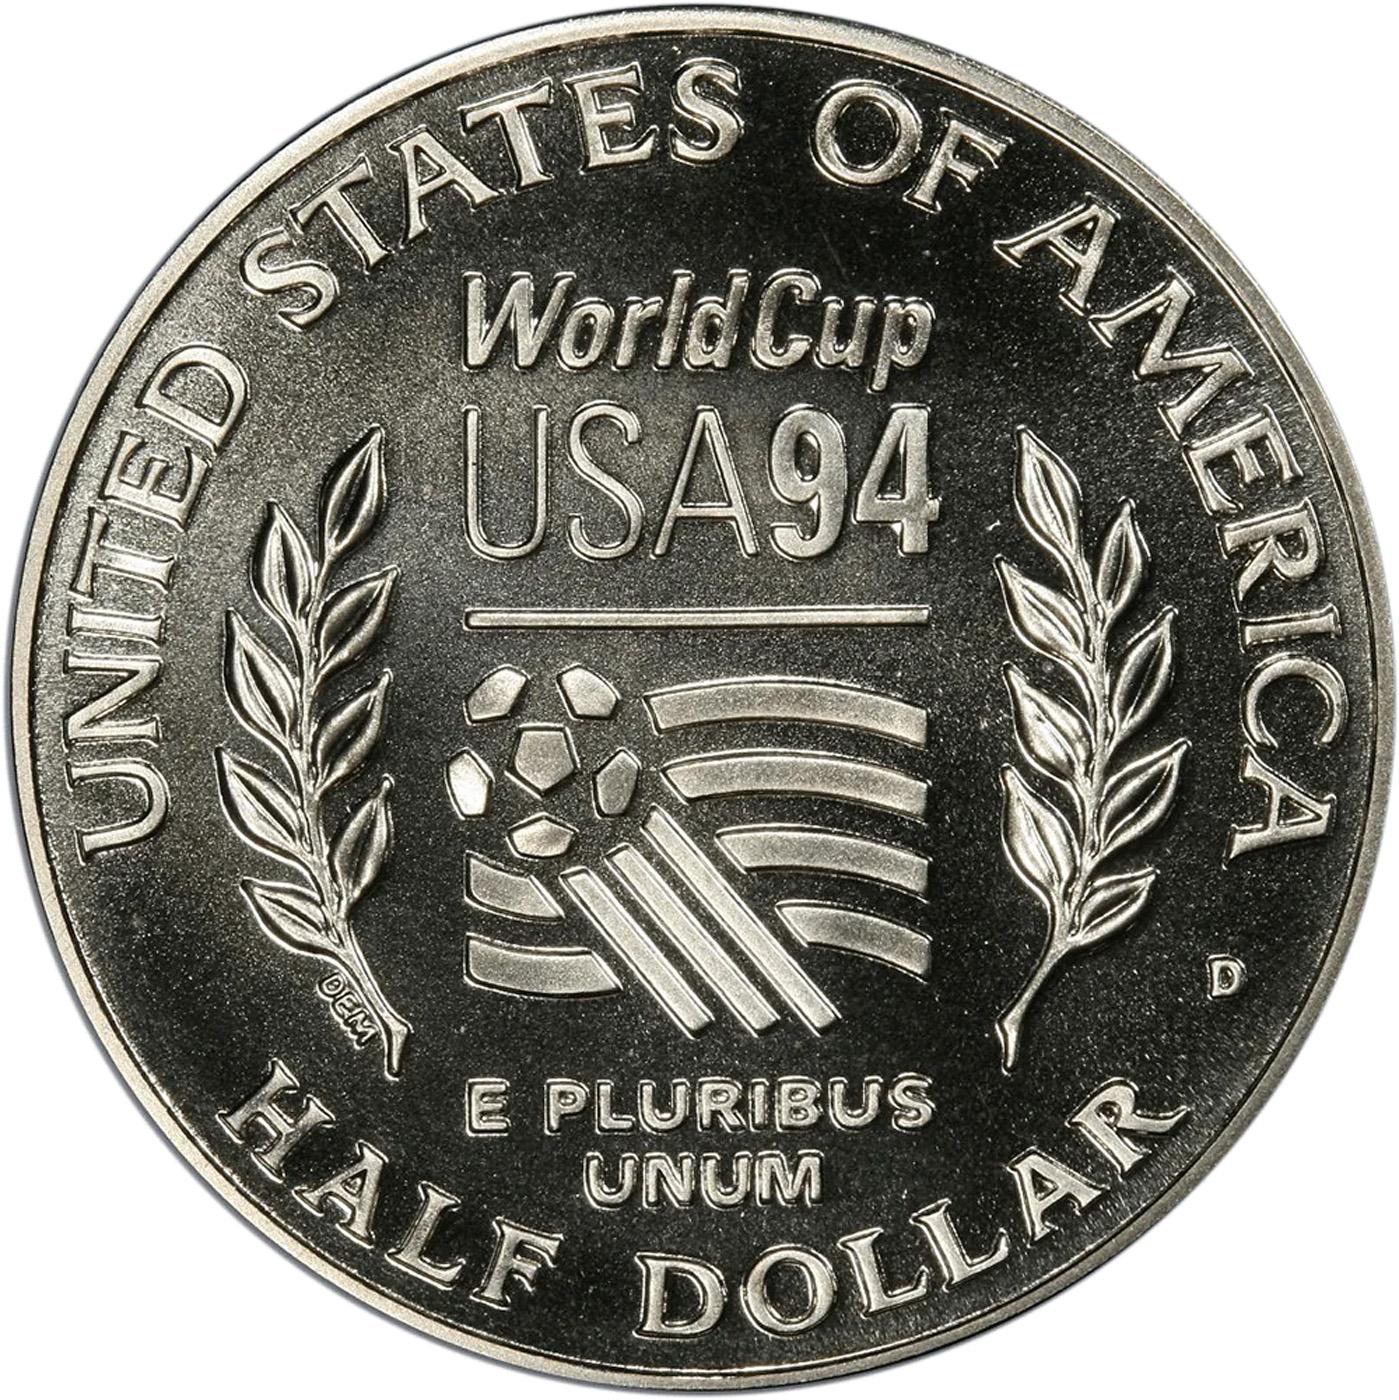 1994-D World Cup Uncirculated Half Dollar - Young Collectors Edition